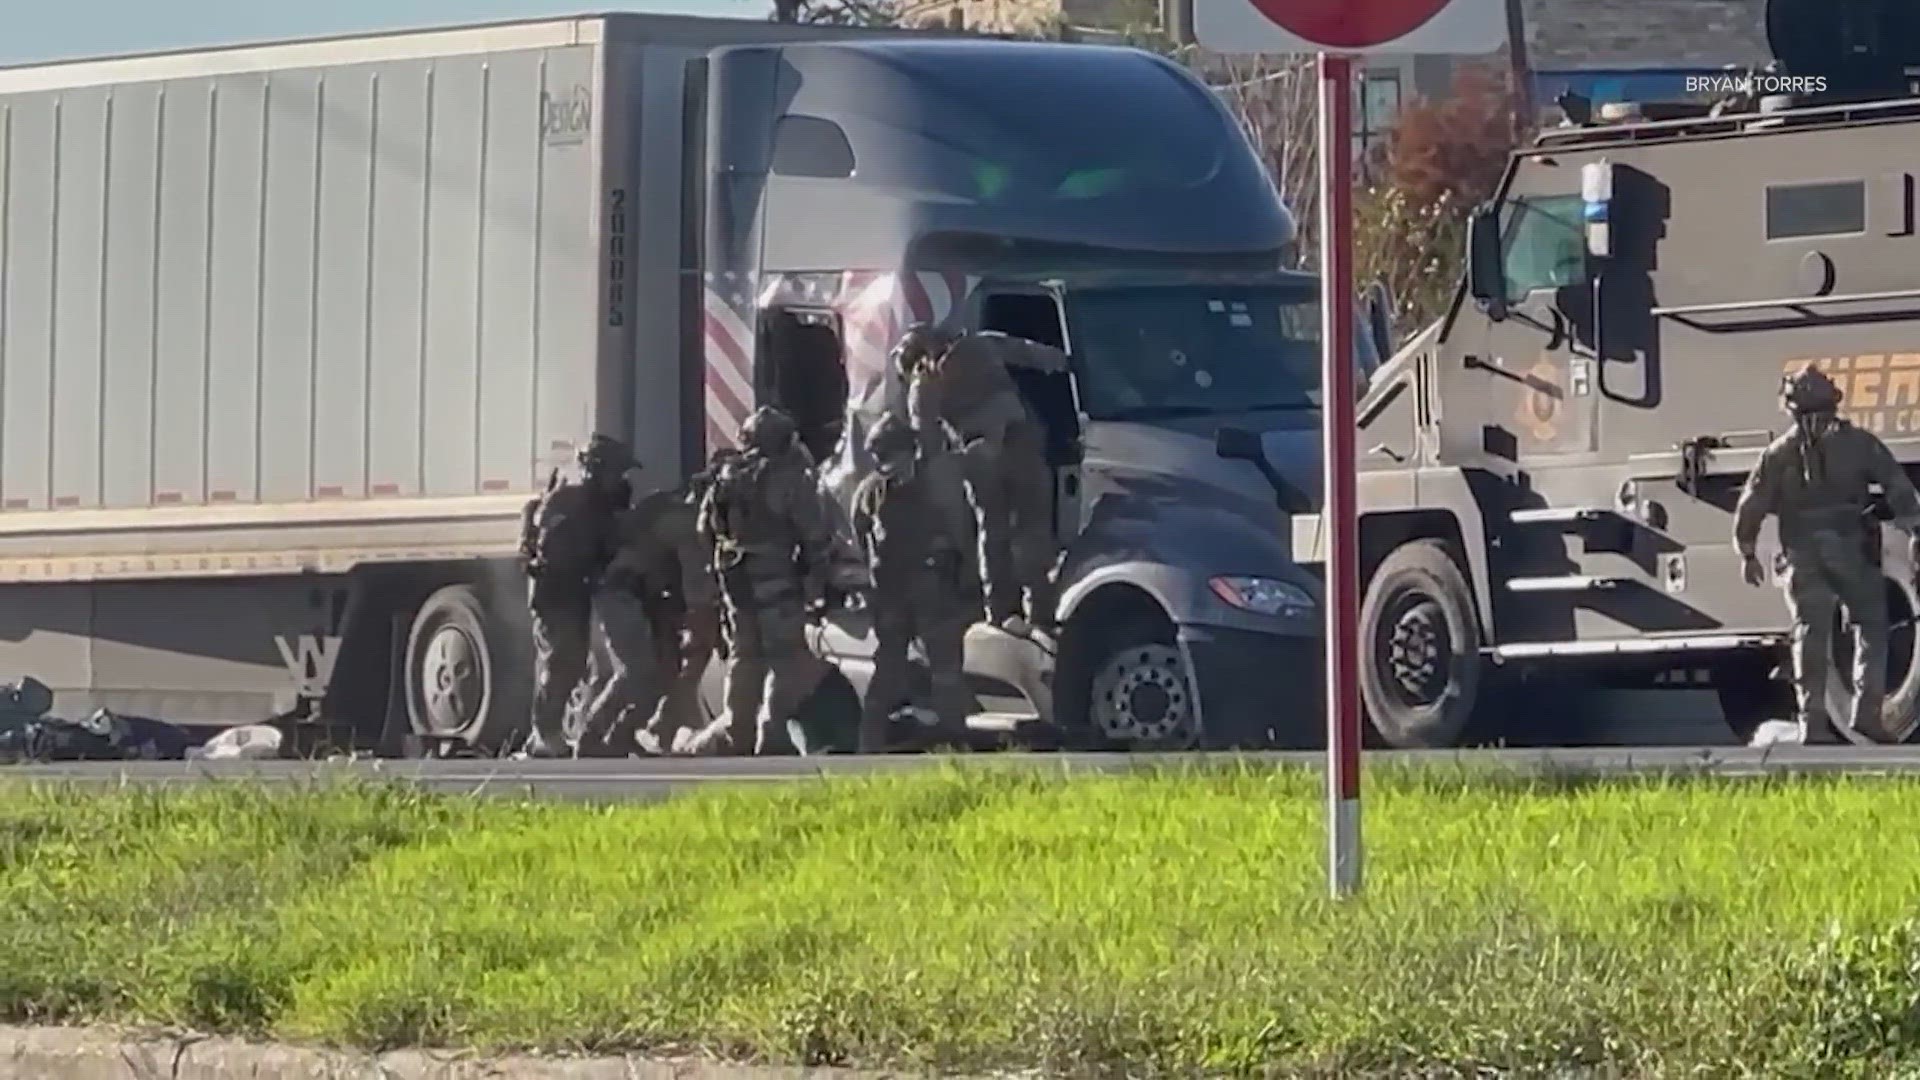 New video shows the driver being pulled out by a SWAT team after the hours-long standoff.